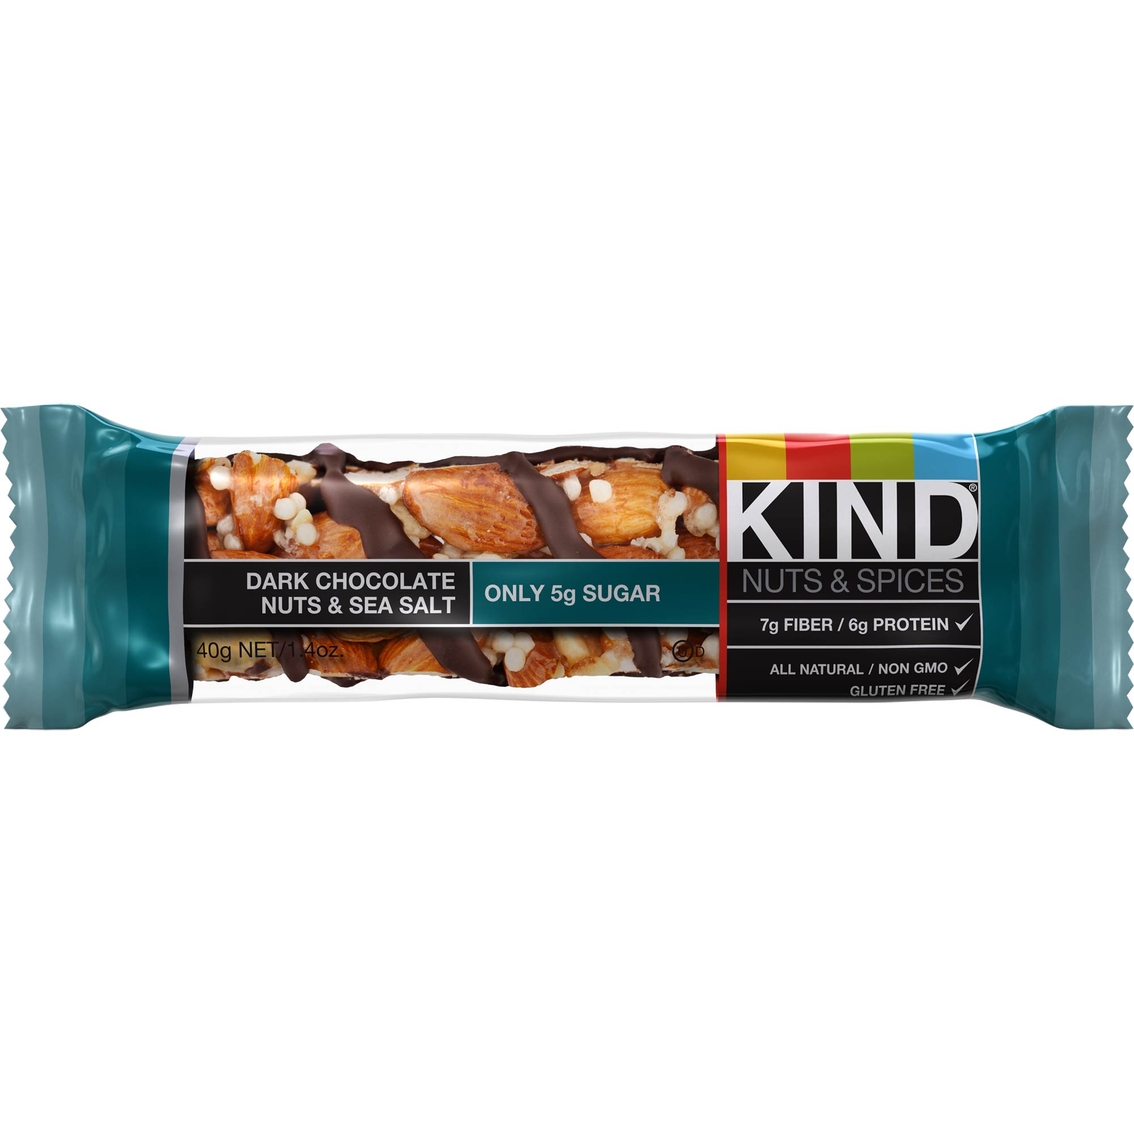 KIND Nuts & Spices Bars 4 Pack - Image 2 of 2